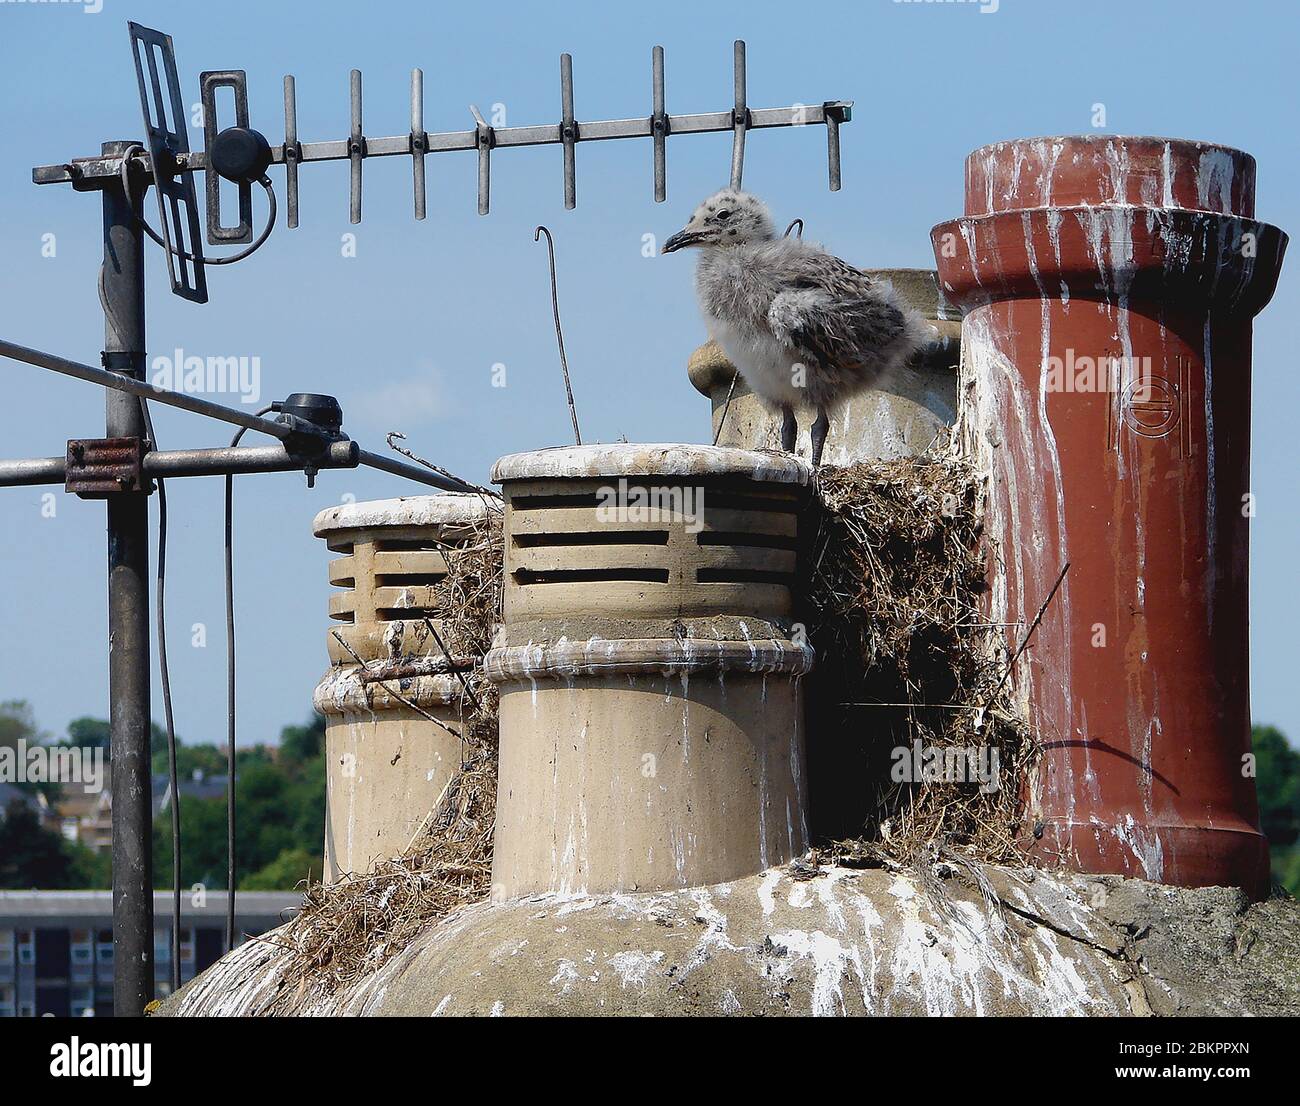 Small English seagull chick on a chimney stack preparing to fly. The ingenious parent has built an unusual  'penthouse' nest, filling the spaces between anti-nesting rods placed to stop seagulls from nesting and has even used one of the rods of a television aerial in the construction, demonstrating bird intelligence. Stock Photo